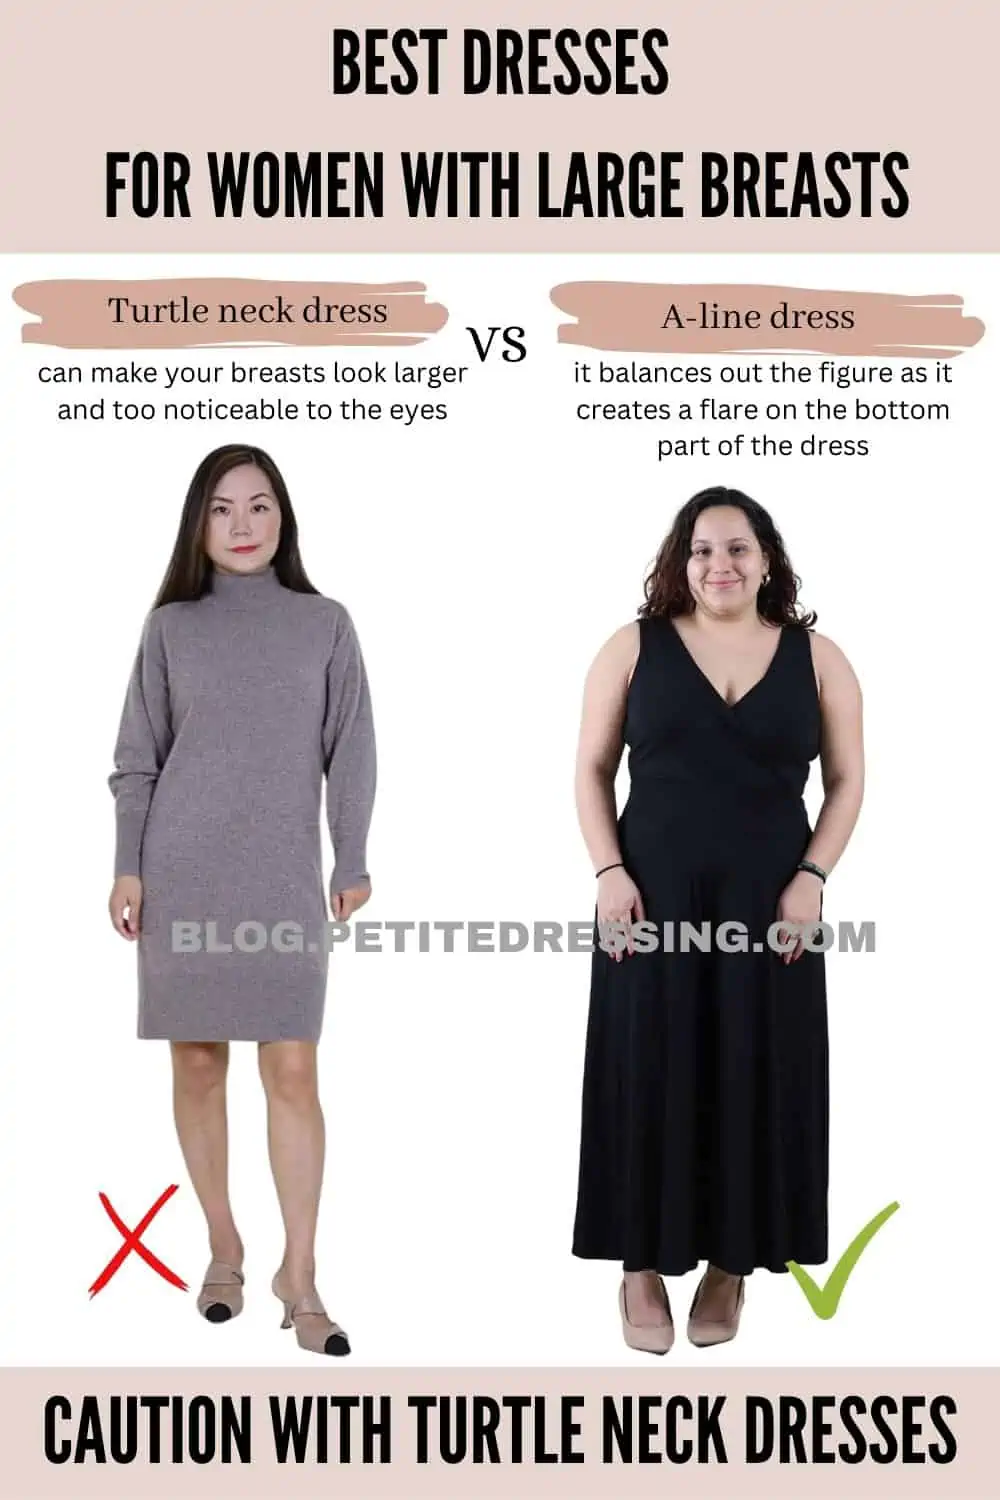 The Complete Dress Guide for Women with Large Breasts - Petite